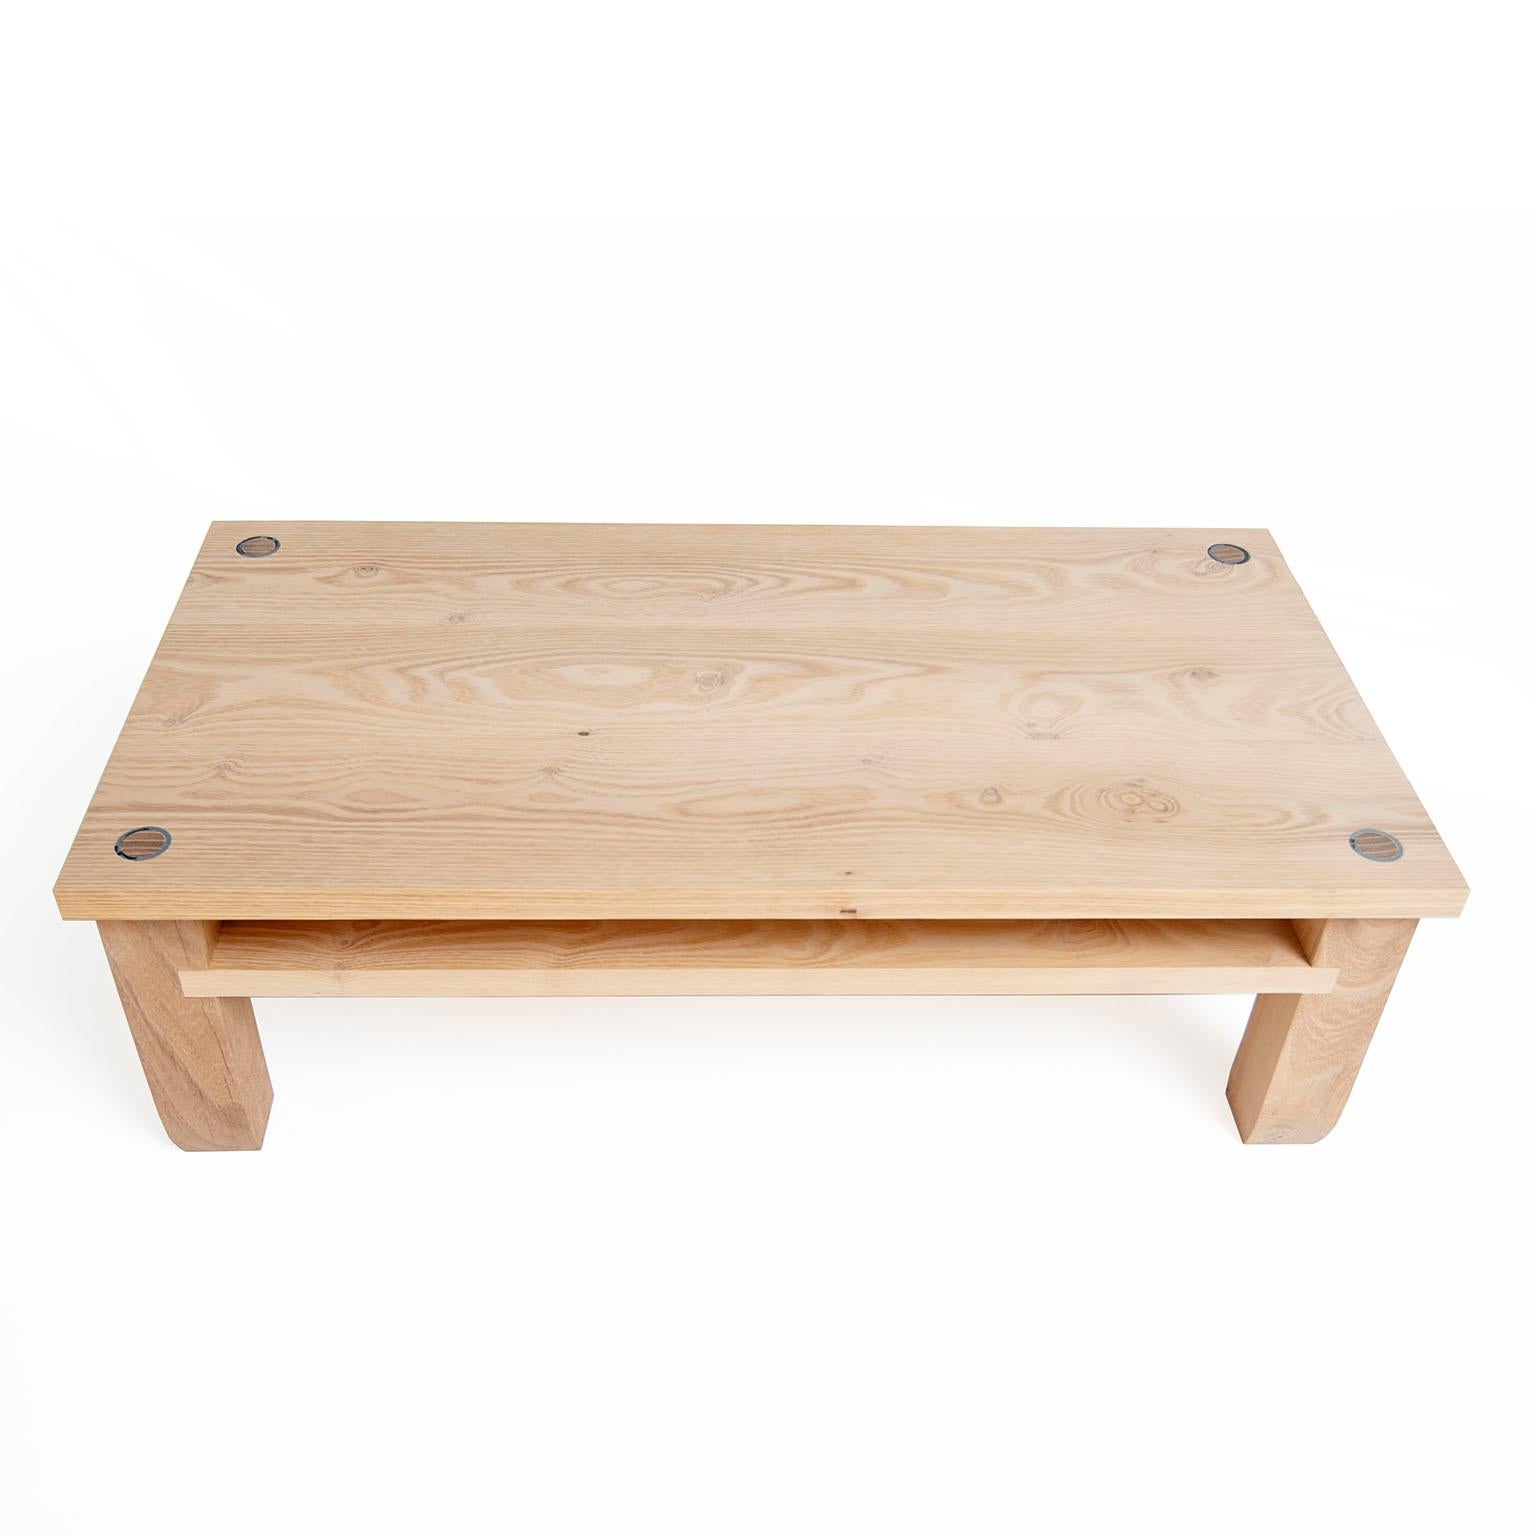 Contemporary Black Locust Hardwood Low Garden Foyer Shower Shoe Bench Medium In New Condition For Sale In Brooklyn, NY